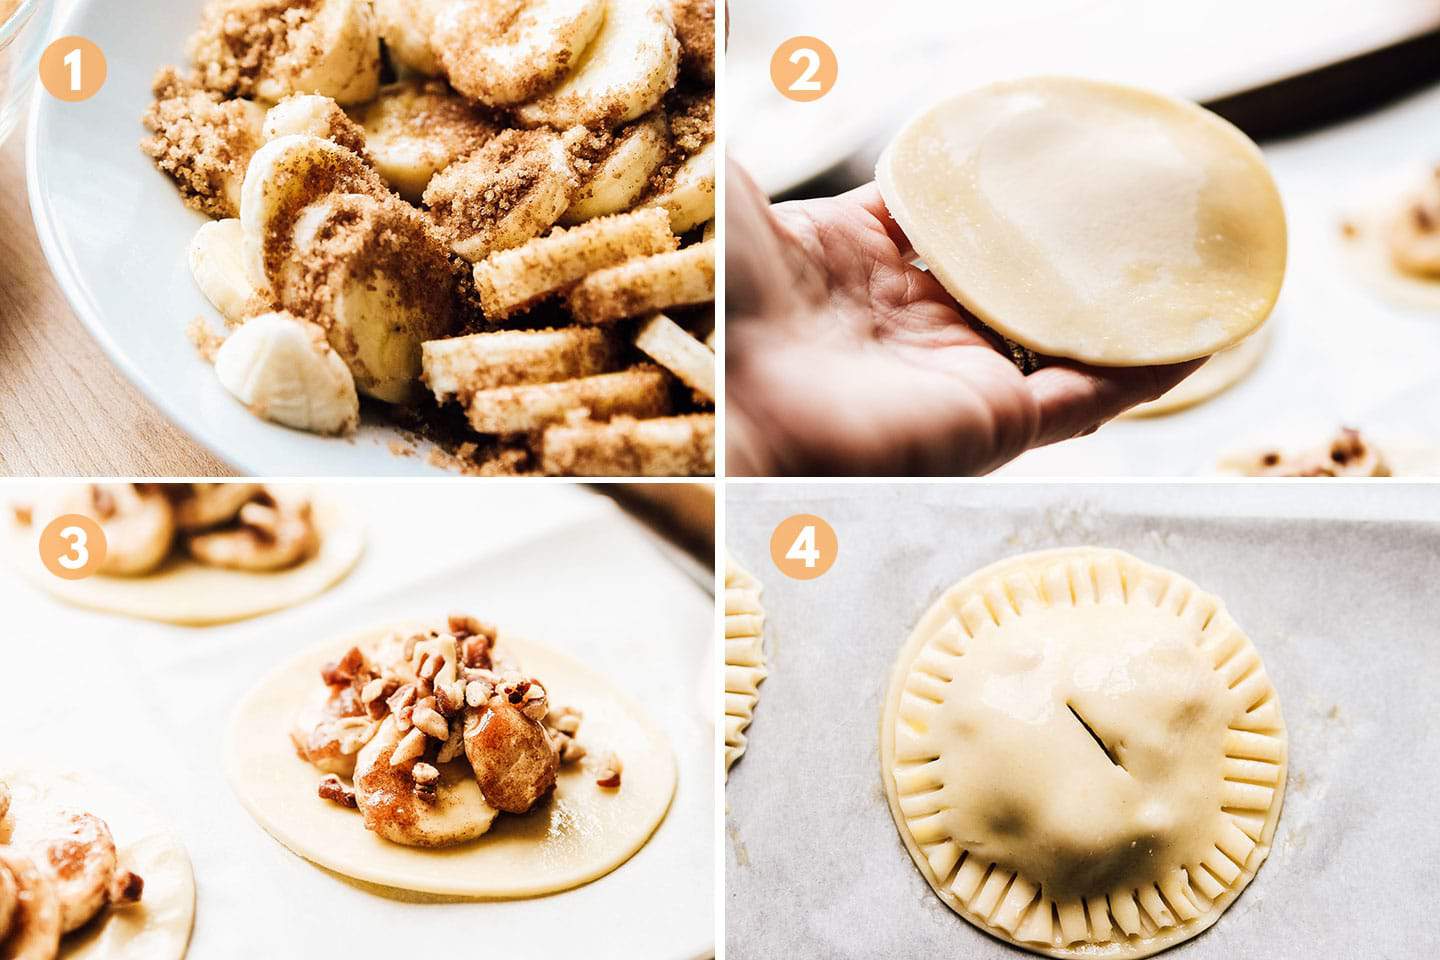 Photos showing how to make hand pies.